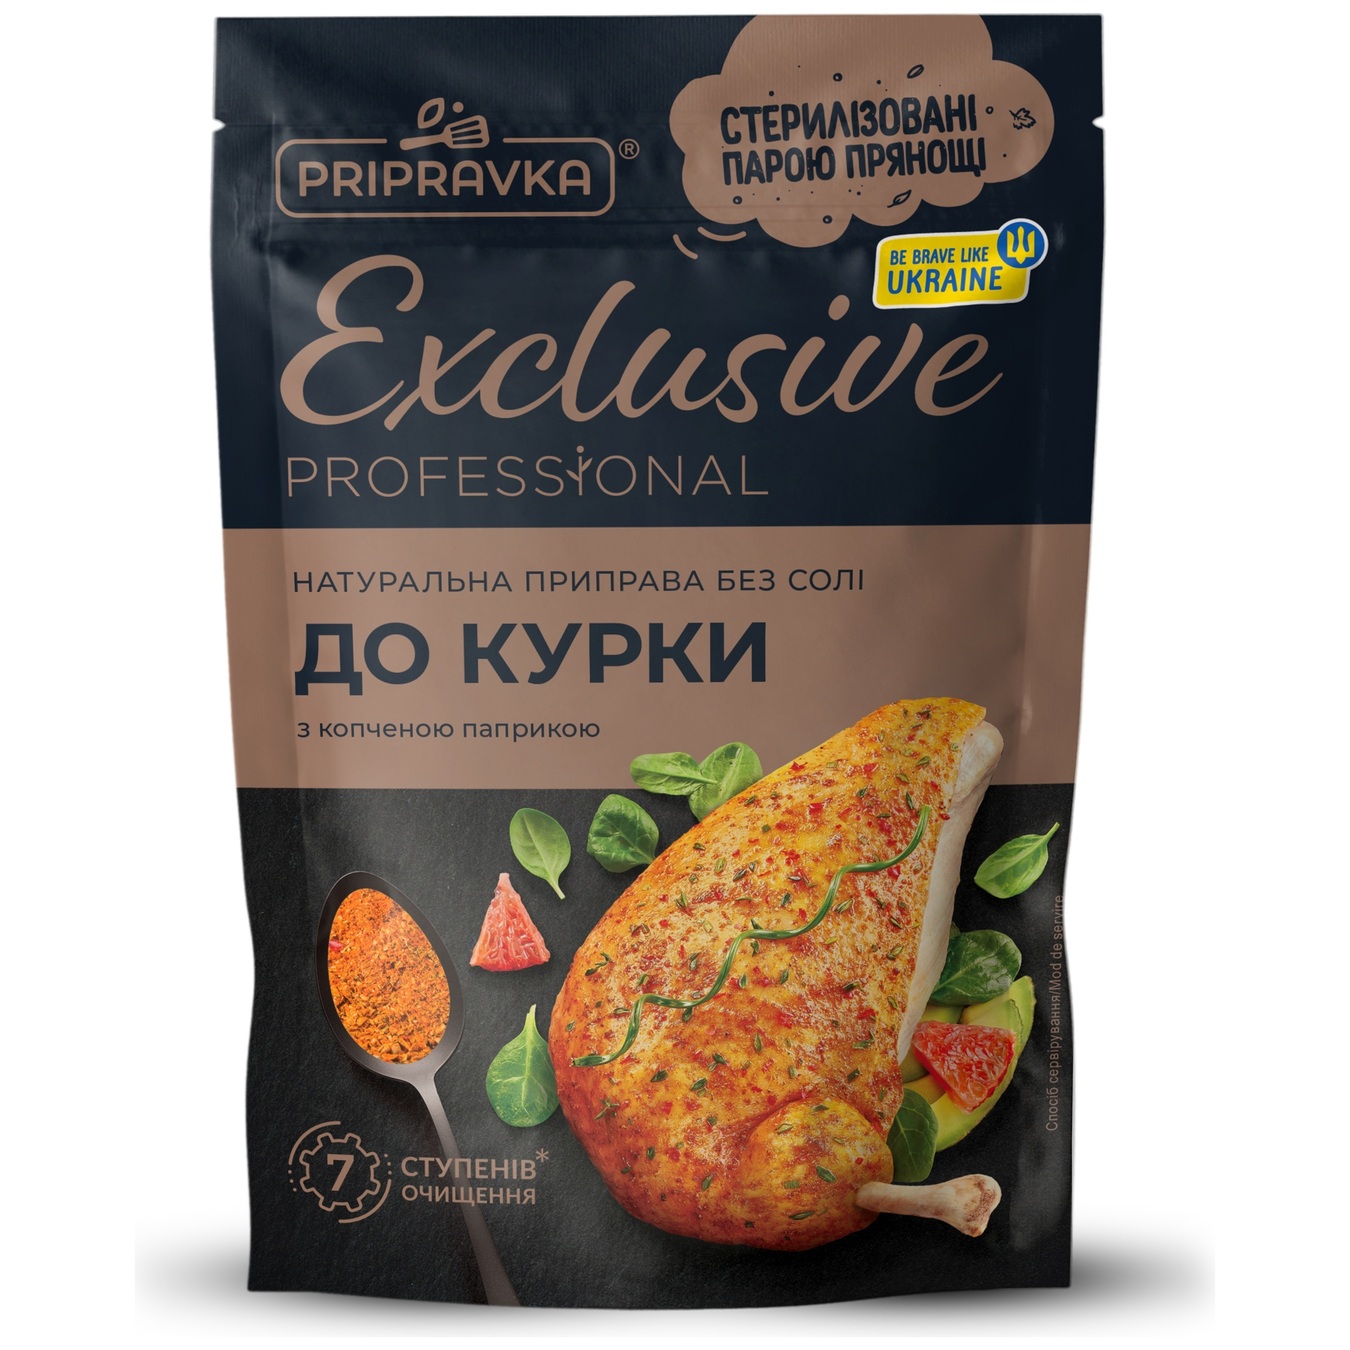 Pripravka Exclusive Professional For Chicken Natural Without Salt Seasoning 50g